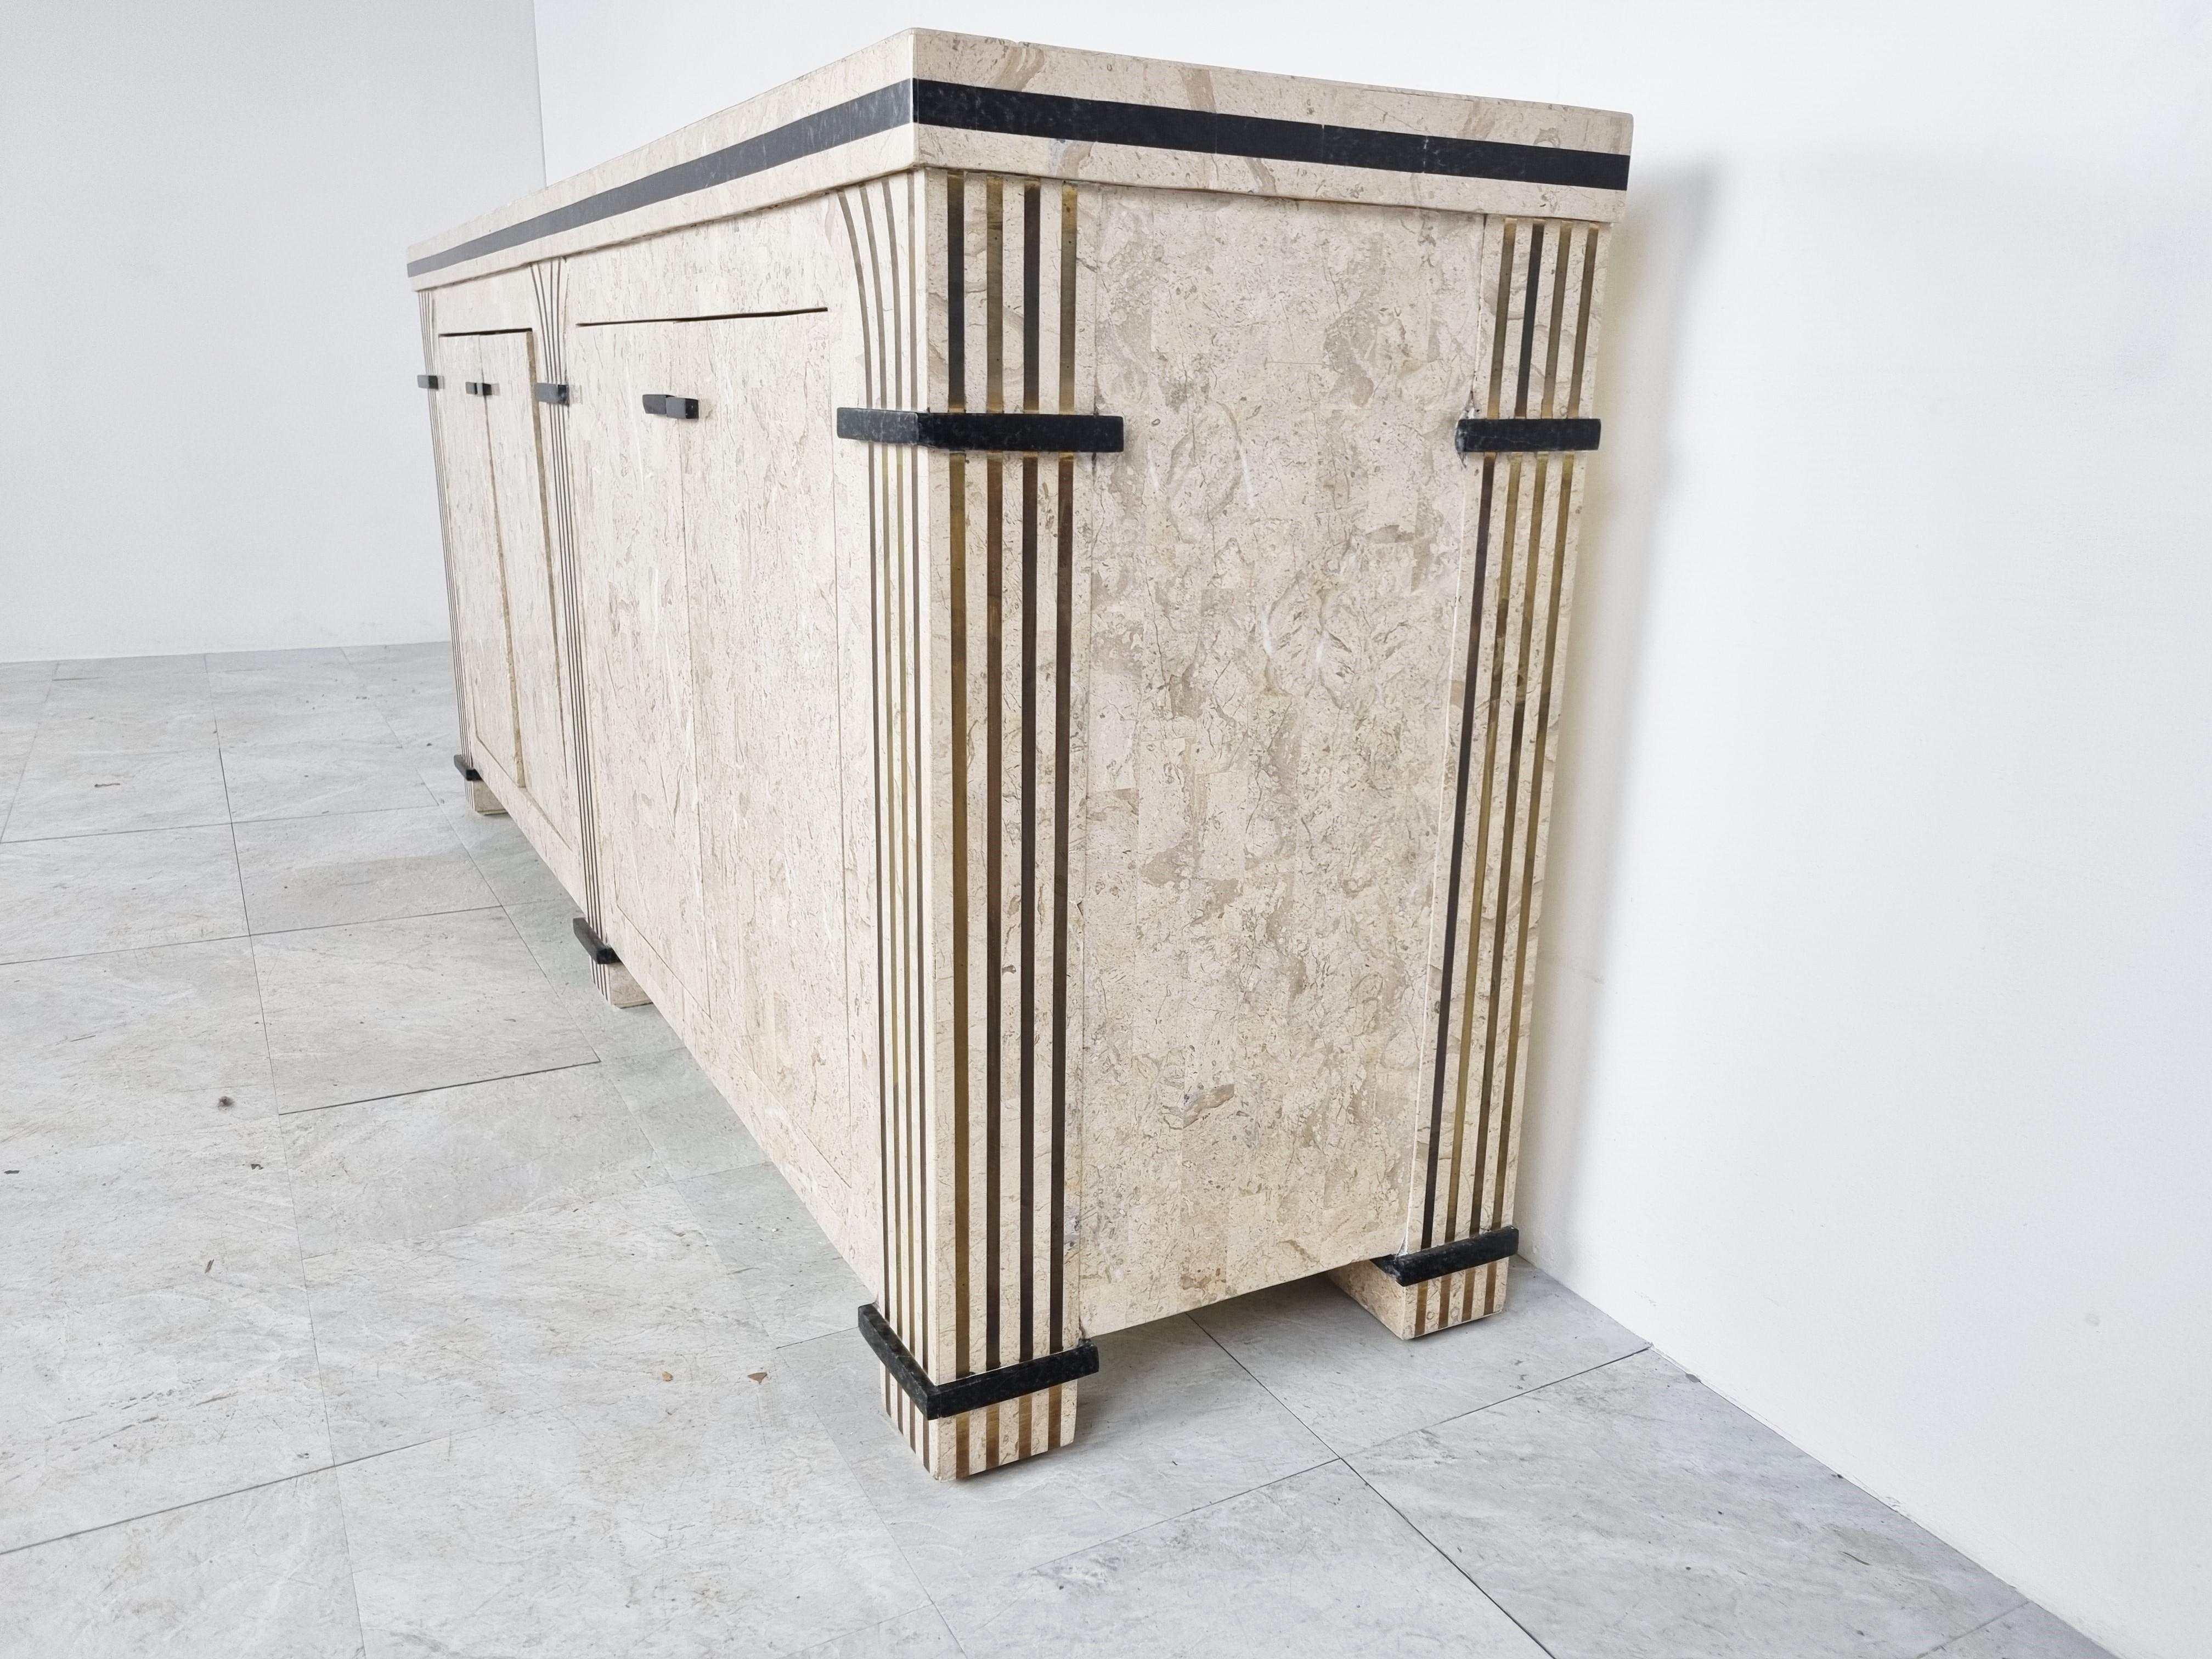 Rare tessellated stone/marble sideboard in the manner of Maitland Smith.

Beautifully finished with inlaid brass.

The inside of the sideboard has also a matching finish.

Good condition

1980s - USA

Dimensions:
Lenght: